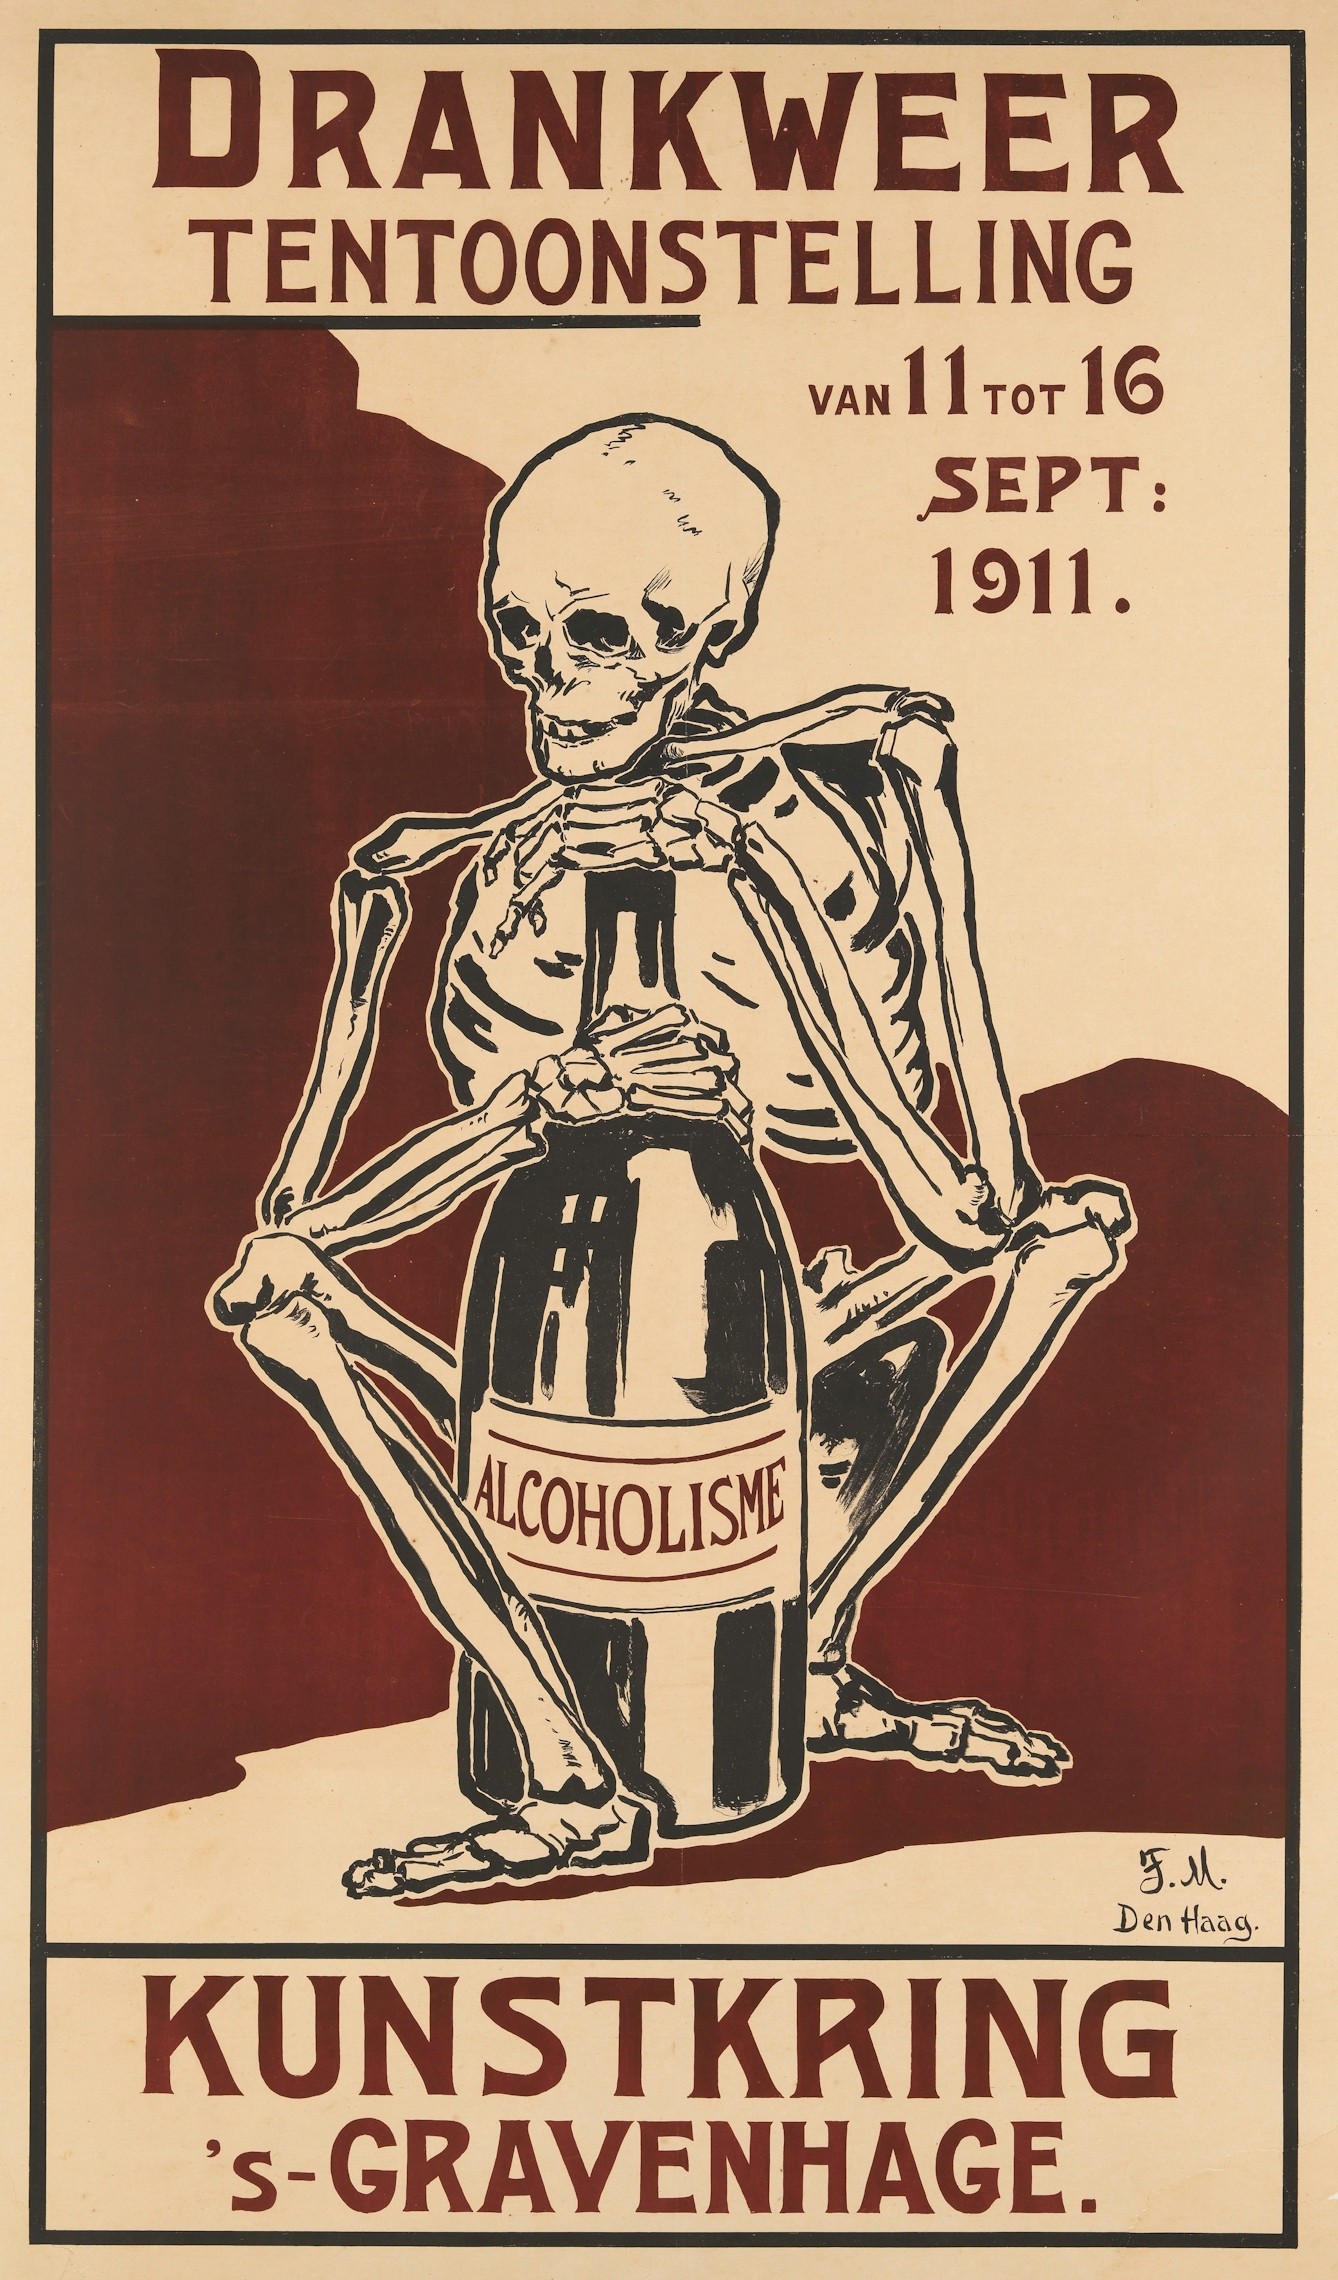 A poster showing a skeleton clutching a large bottle. Poster text in Dutch.